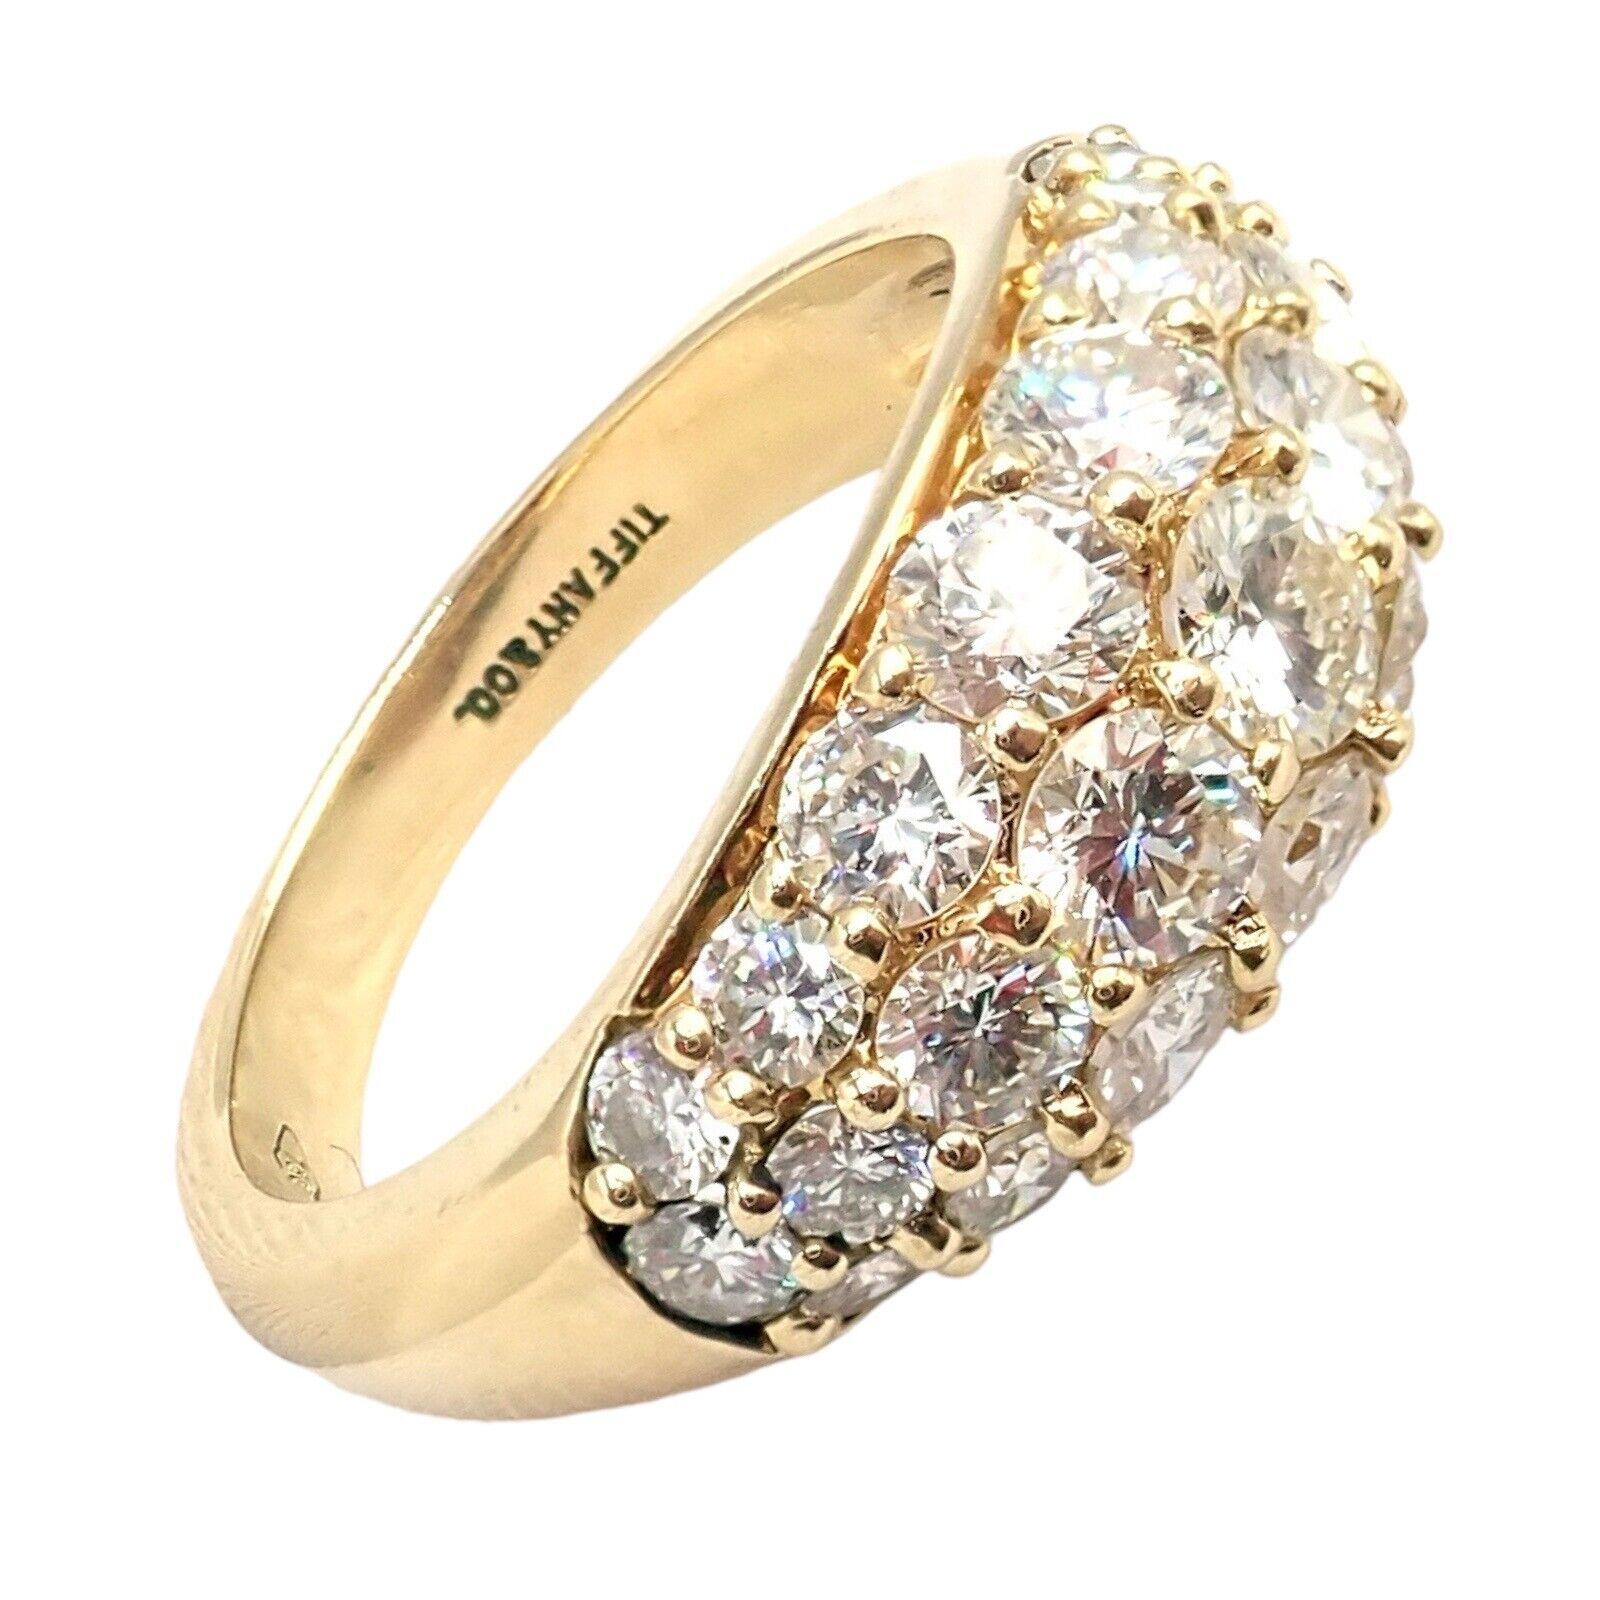 18k Yellow Gold Diamond Band Ring by Tiffany & Co.
With 25 Round Brilliant Cut Diamonds VS1 clarity, G color, Total weight Approximately 2.40ctw
Details:
Ring Size: 6.5
Weight: 6.7 grams
Stamped Hallmarks: Tiffany & Co 750
*Free Shipping within the